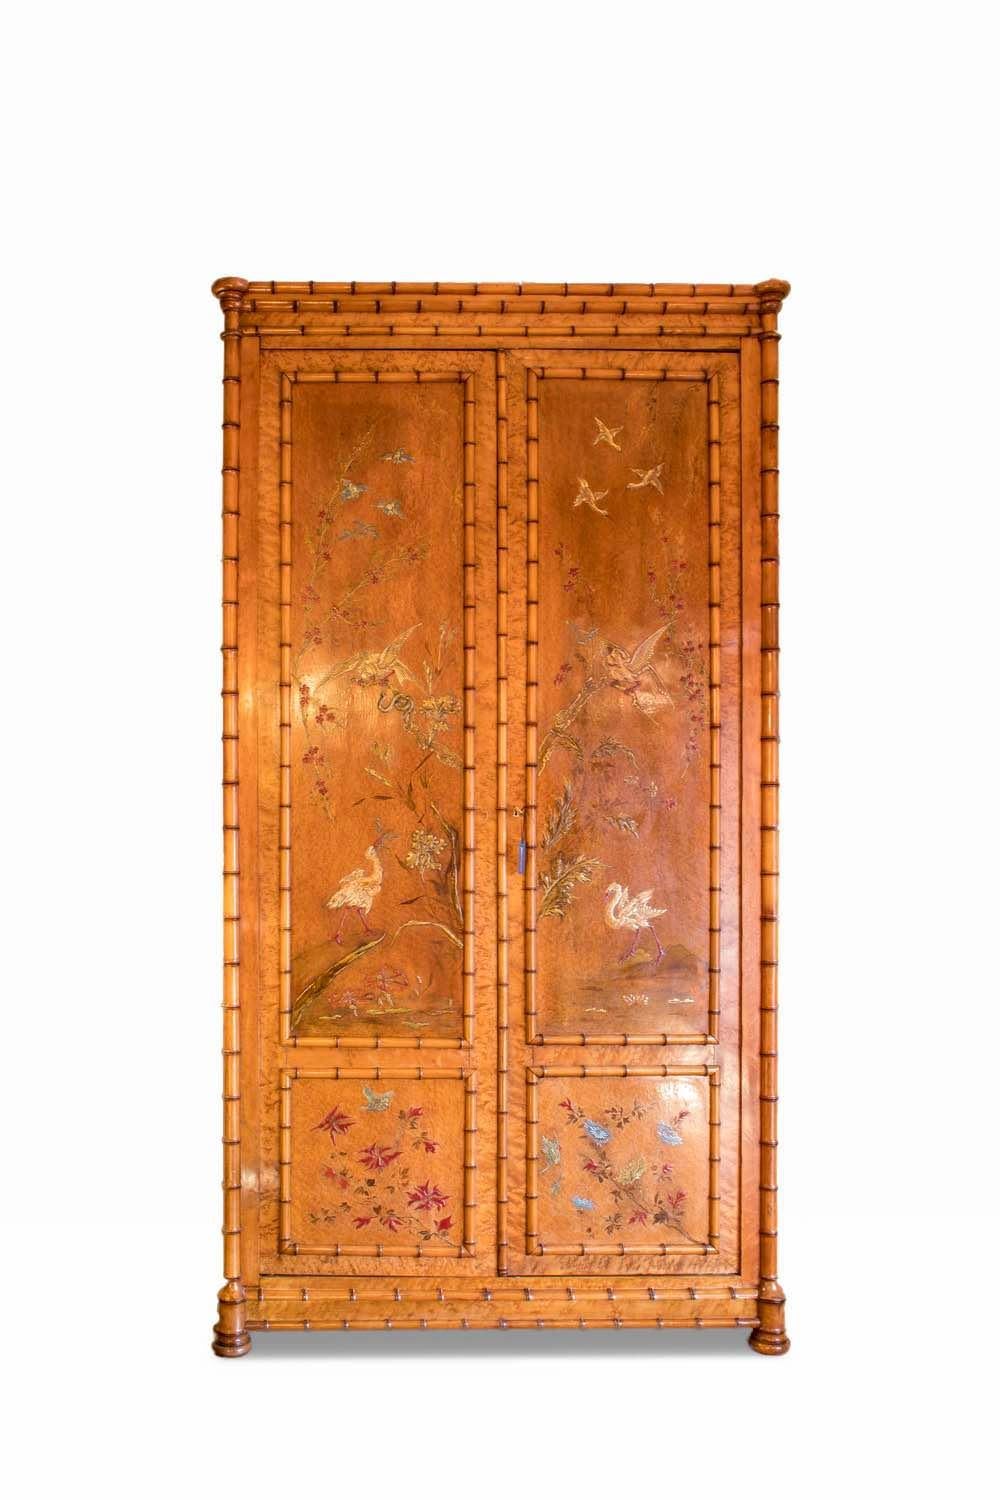 Perret et Vibert, in the style of.

Large Japonism style armoire in cherrywood and bird's-eye maple veneered, opening by two-door leaves in front. Bamboo style rails in turned wood for the whole frame structure. The armoire stands on small